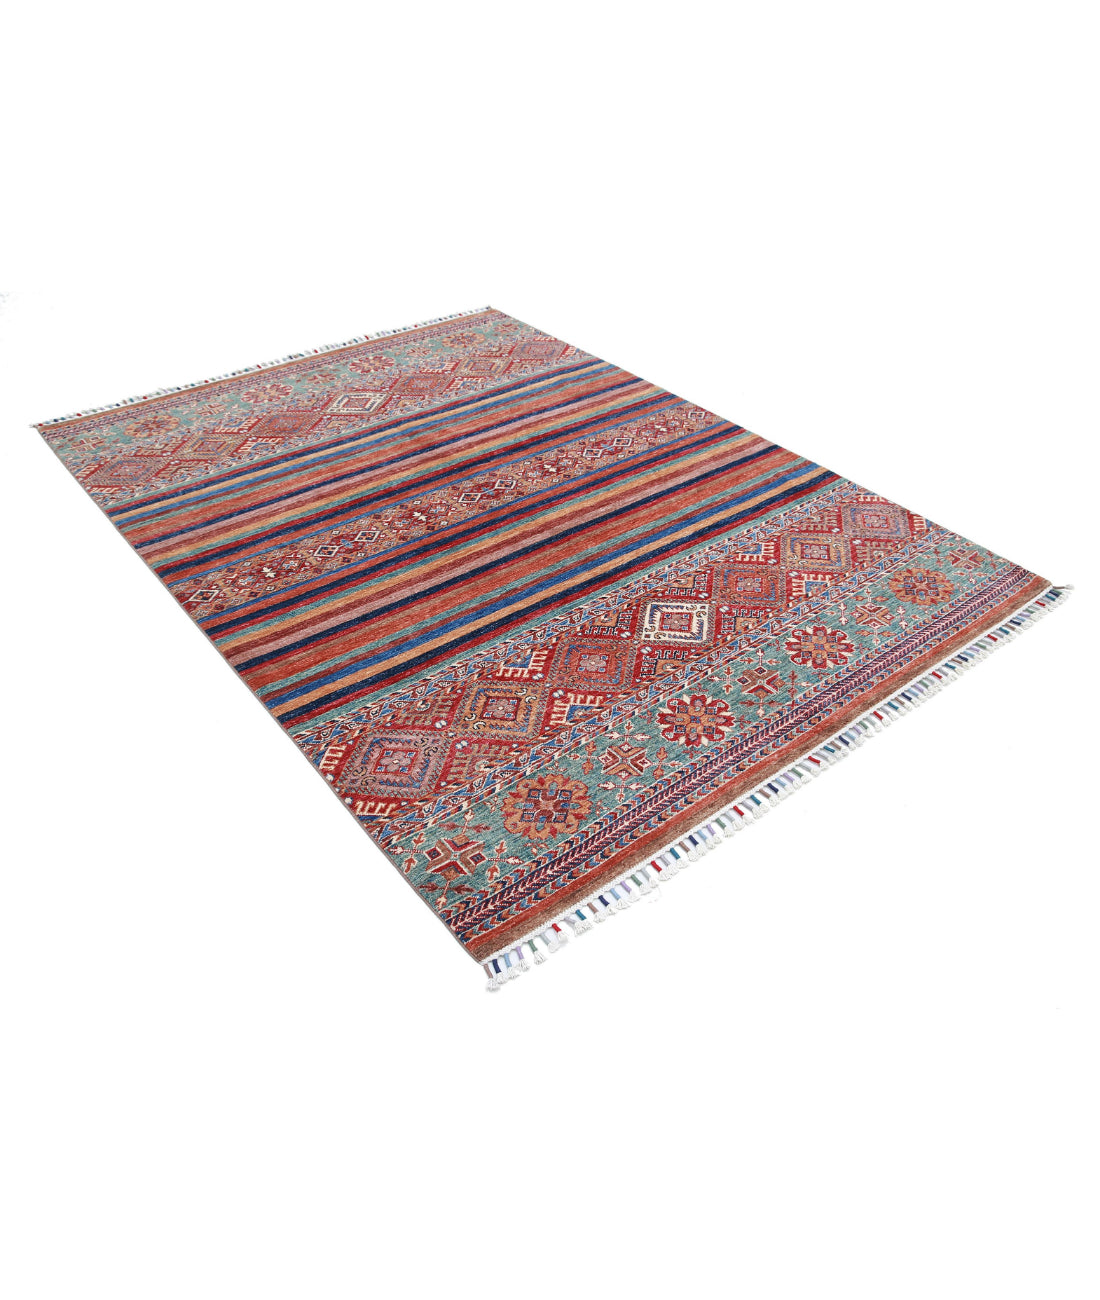 Hand Knotted Khurjeen Wool Rug - 5'9'' x 7'10'' 5'9'' x 7'10'' (173 X 235) / Multi / Multi